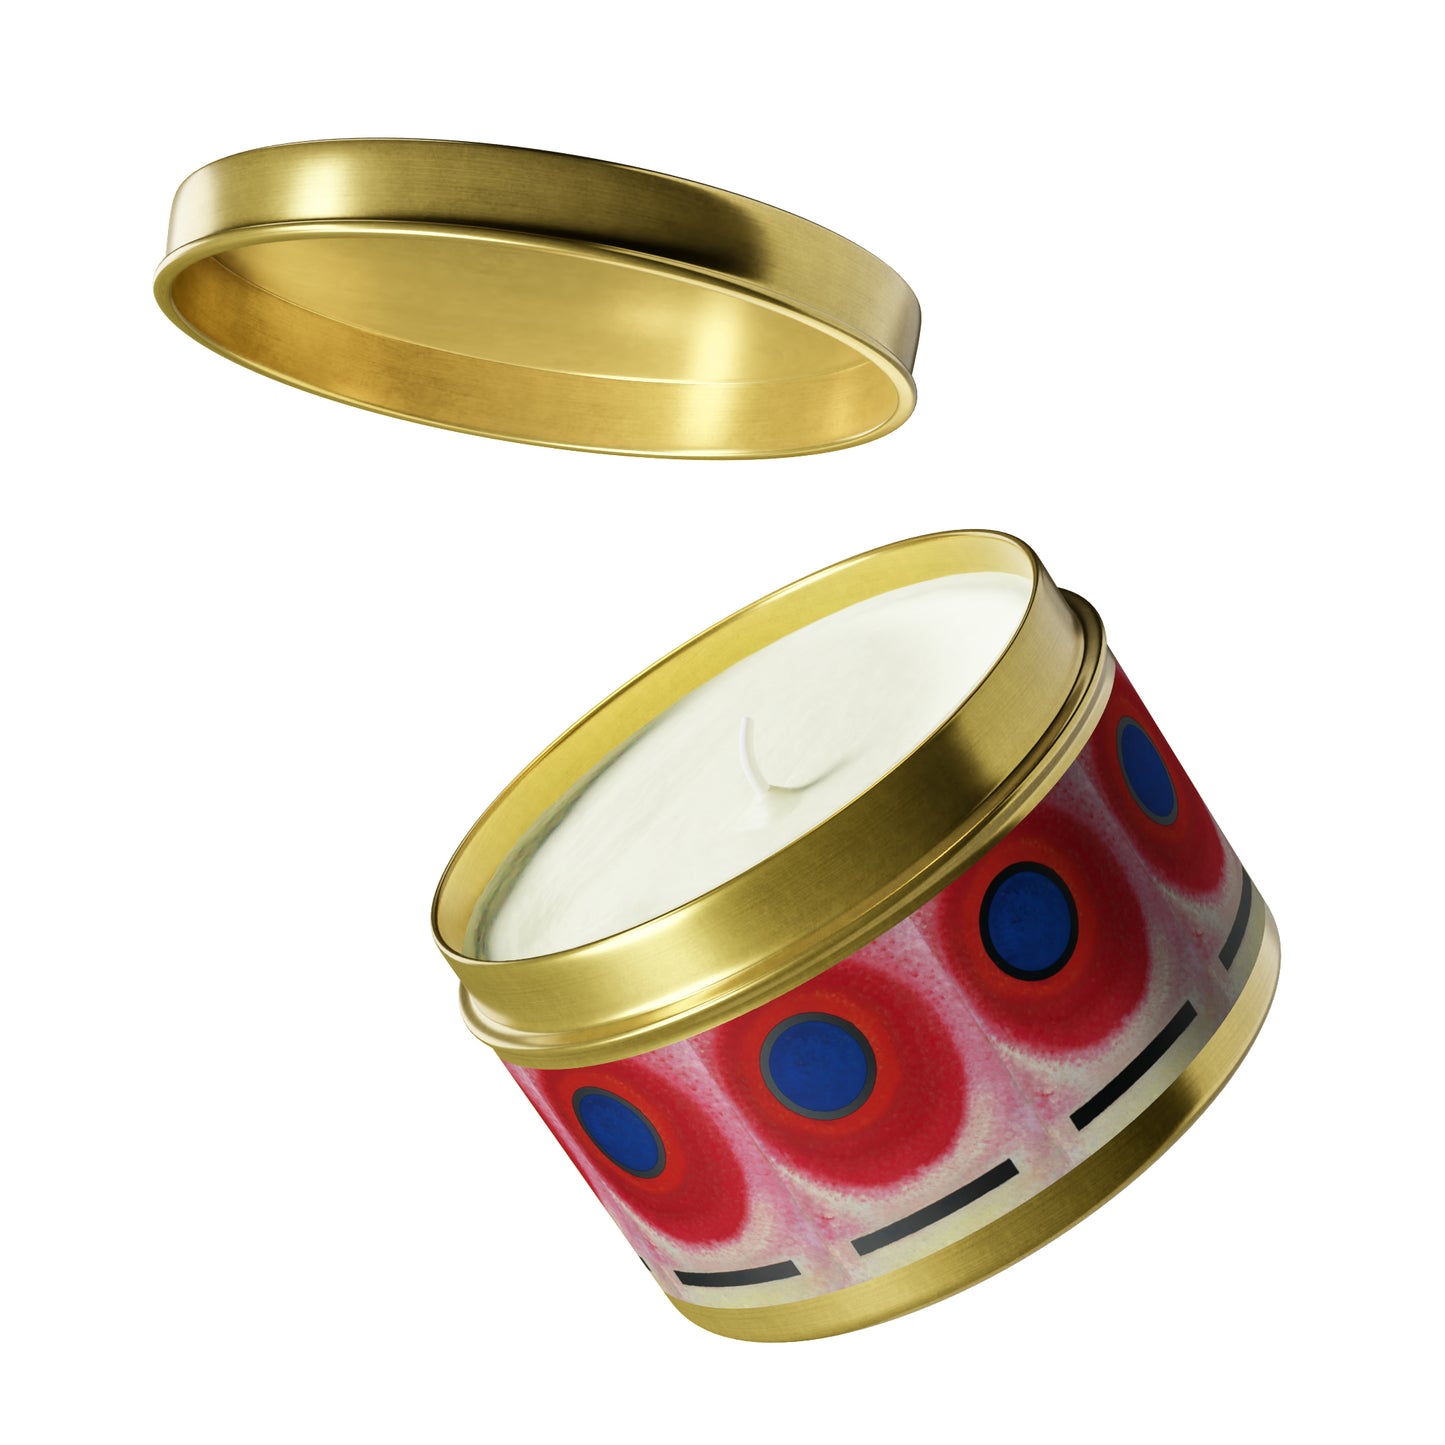 a red and blue candle with a gold lid